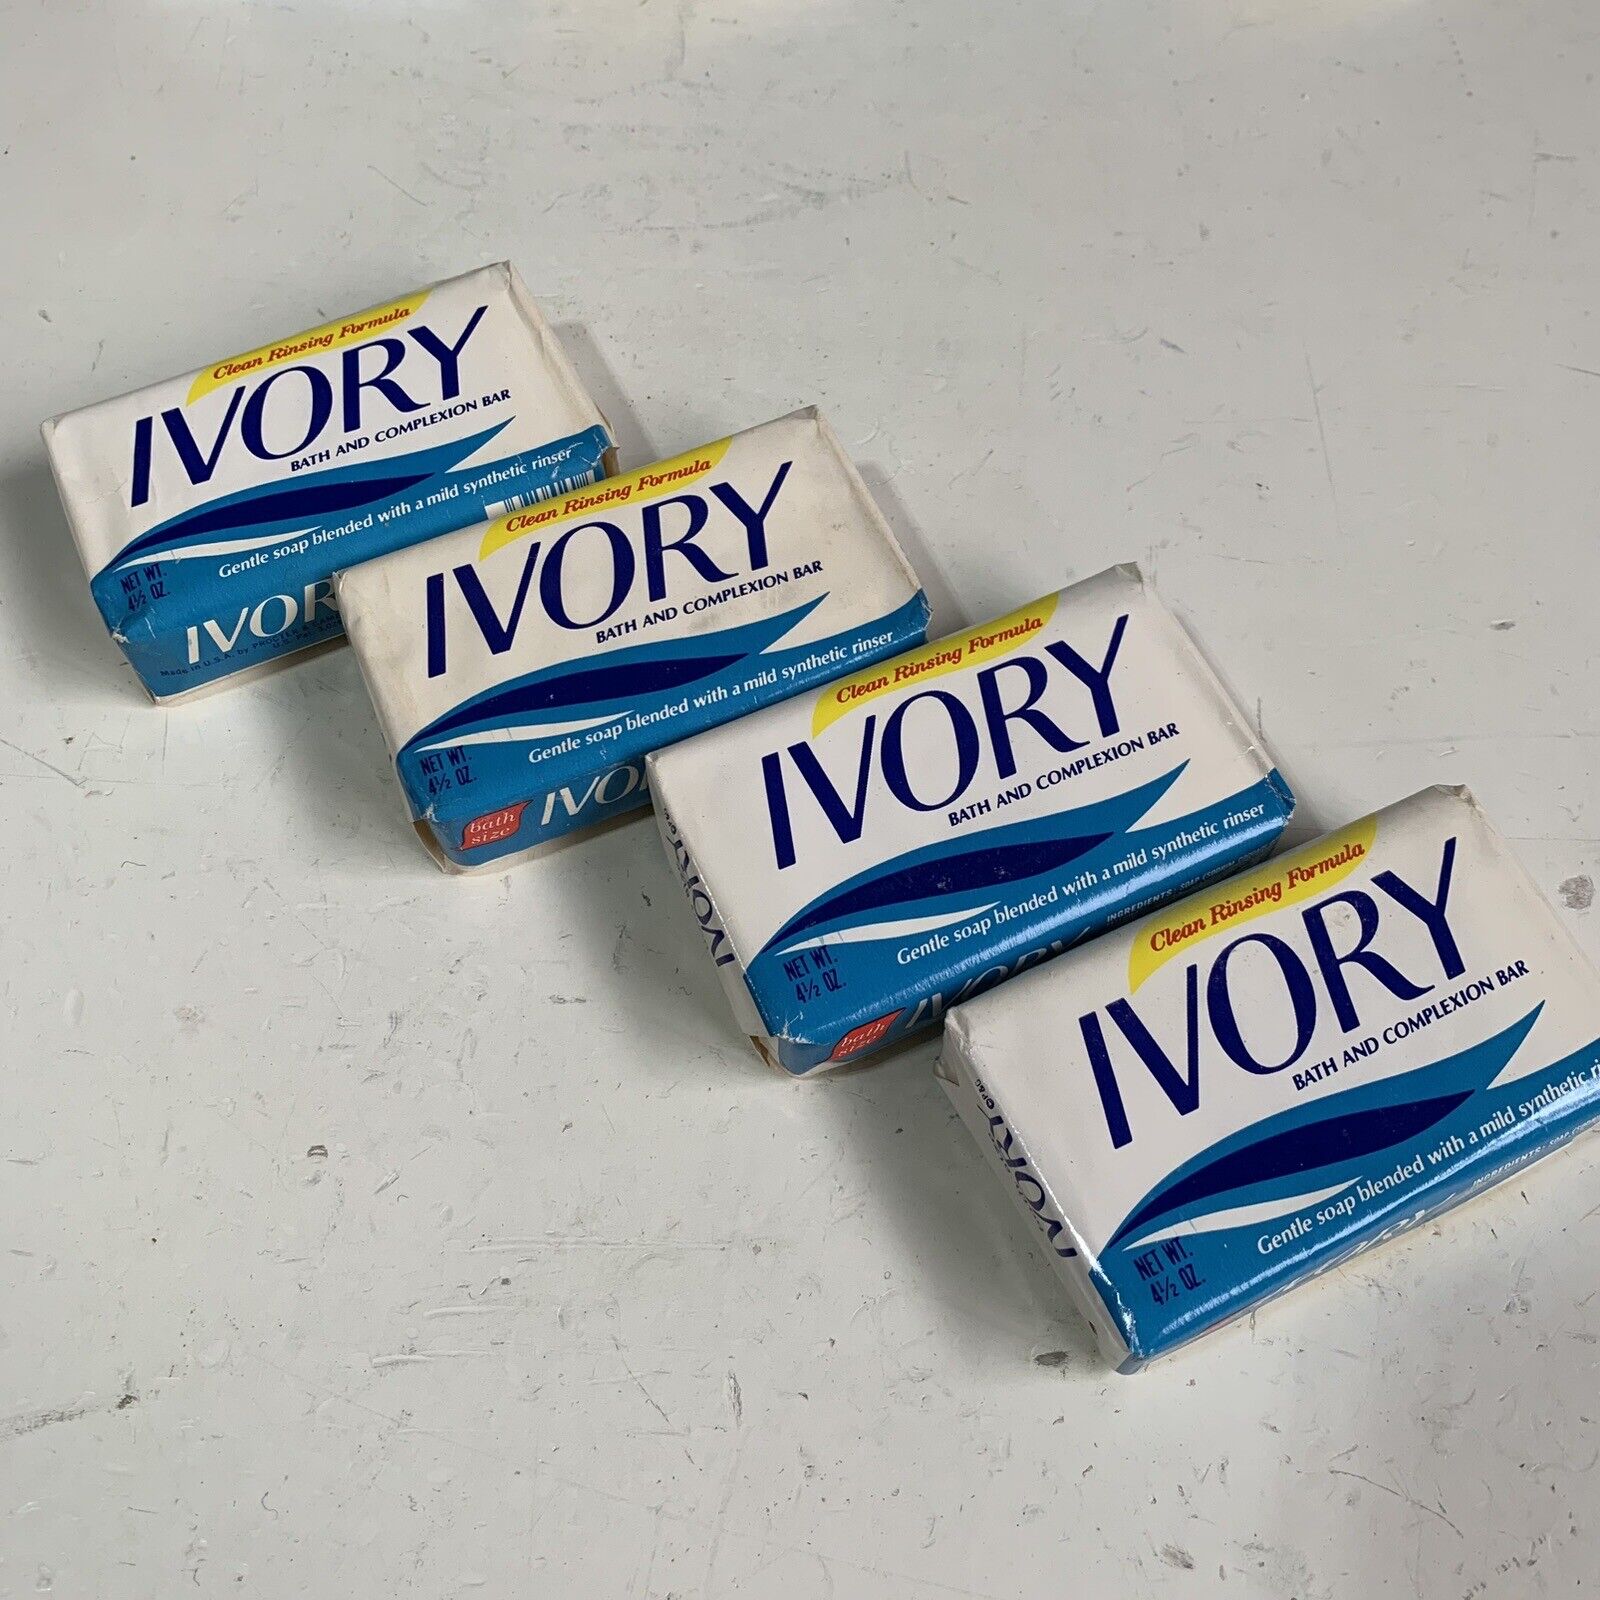 Vintage Ivory Clean Rinsing Formula Bath and Complexion Bar 4.5oz Soap Lot of 4.